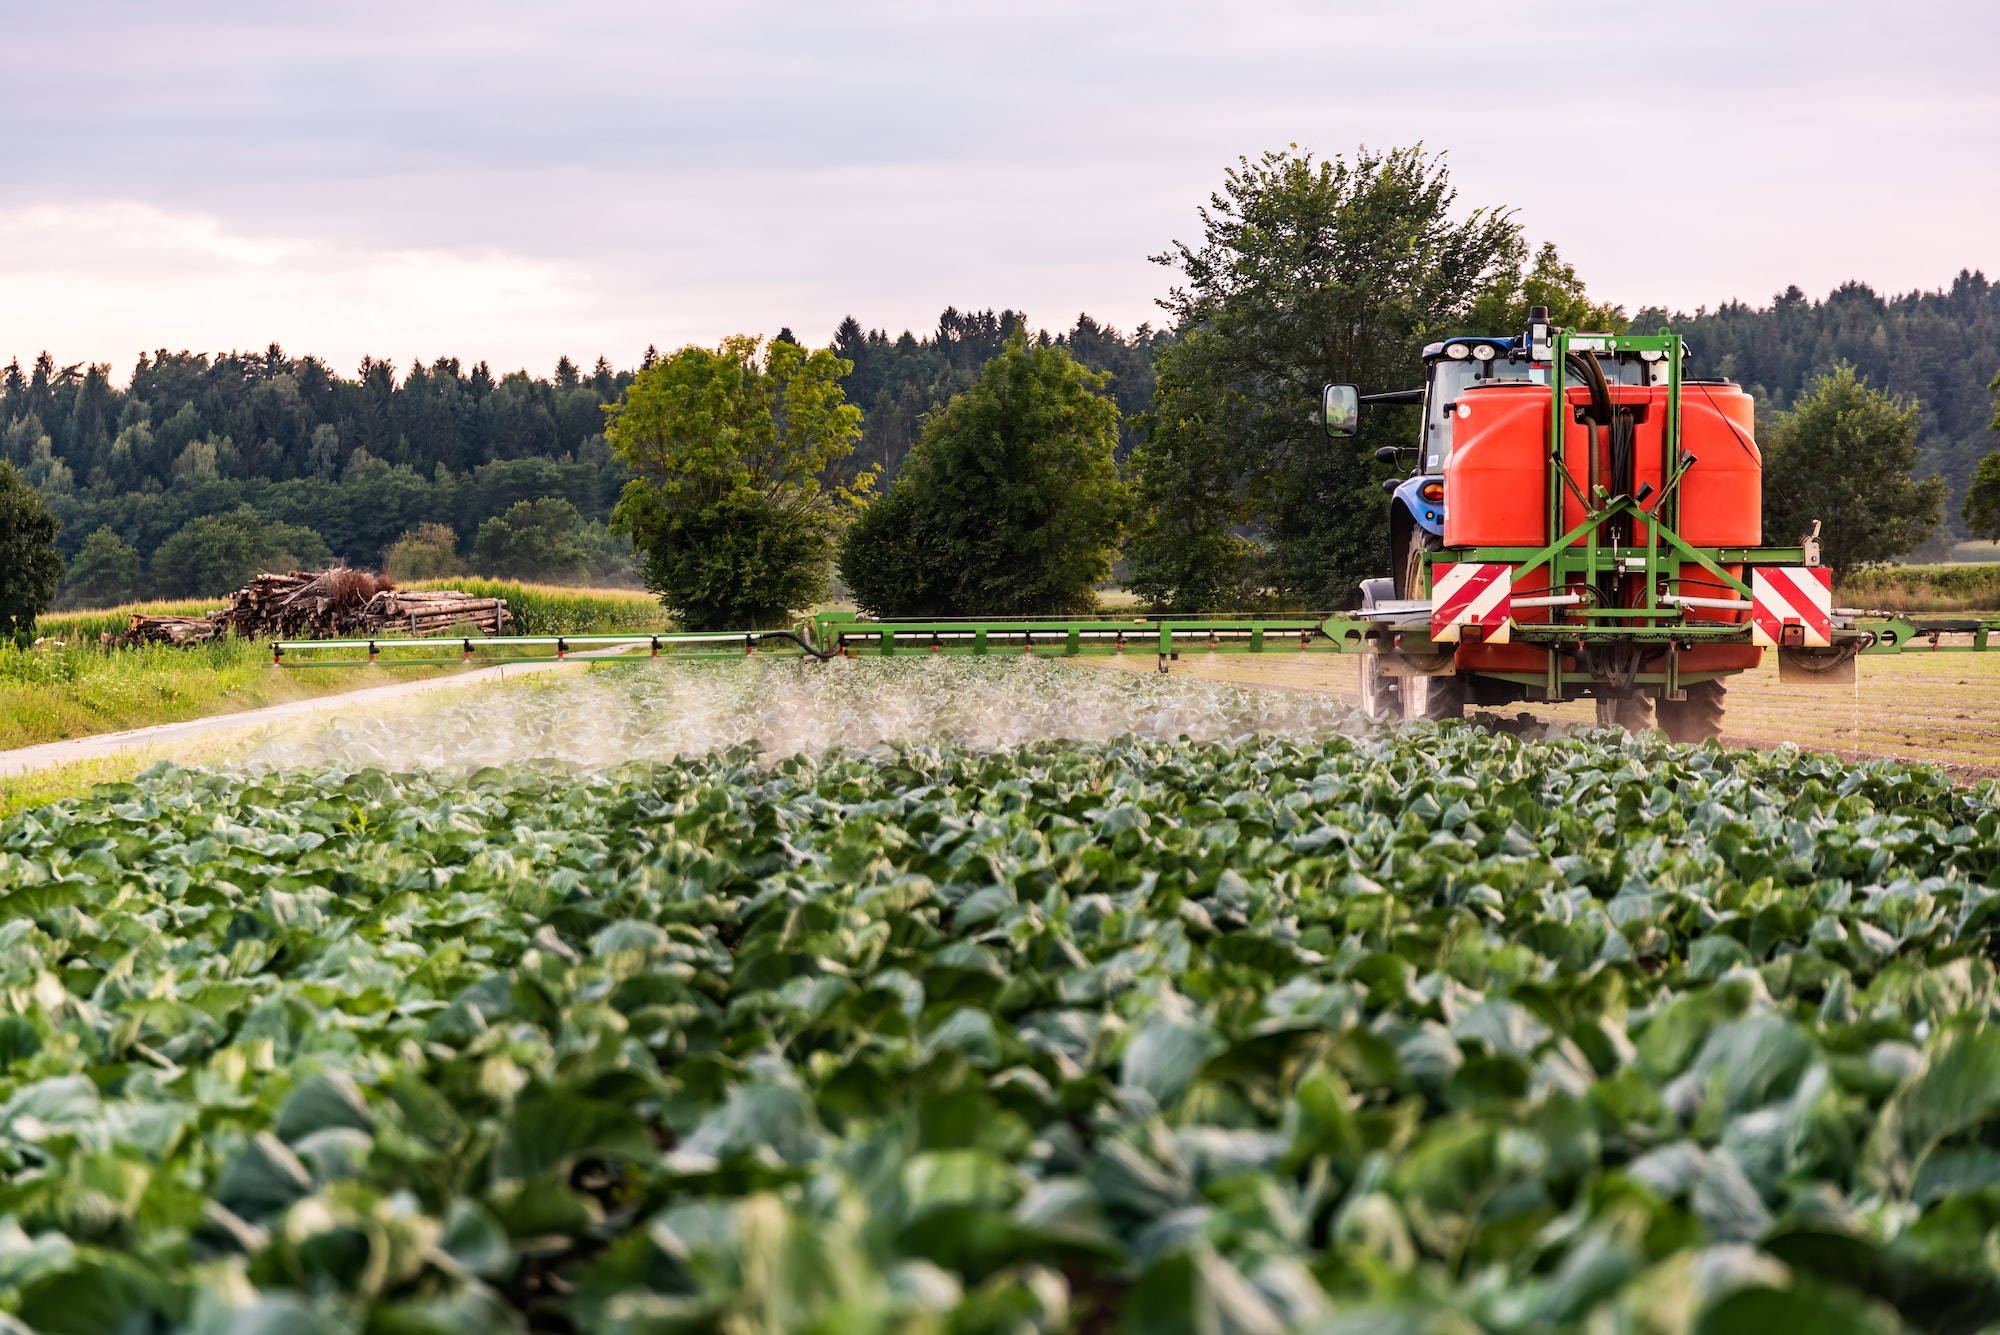 Tractor spraying pesticides on cabbage field